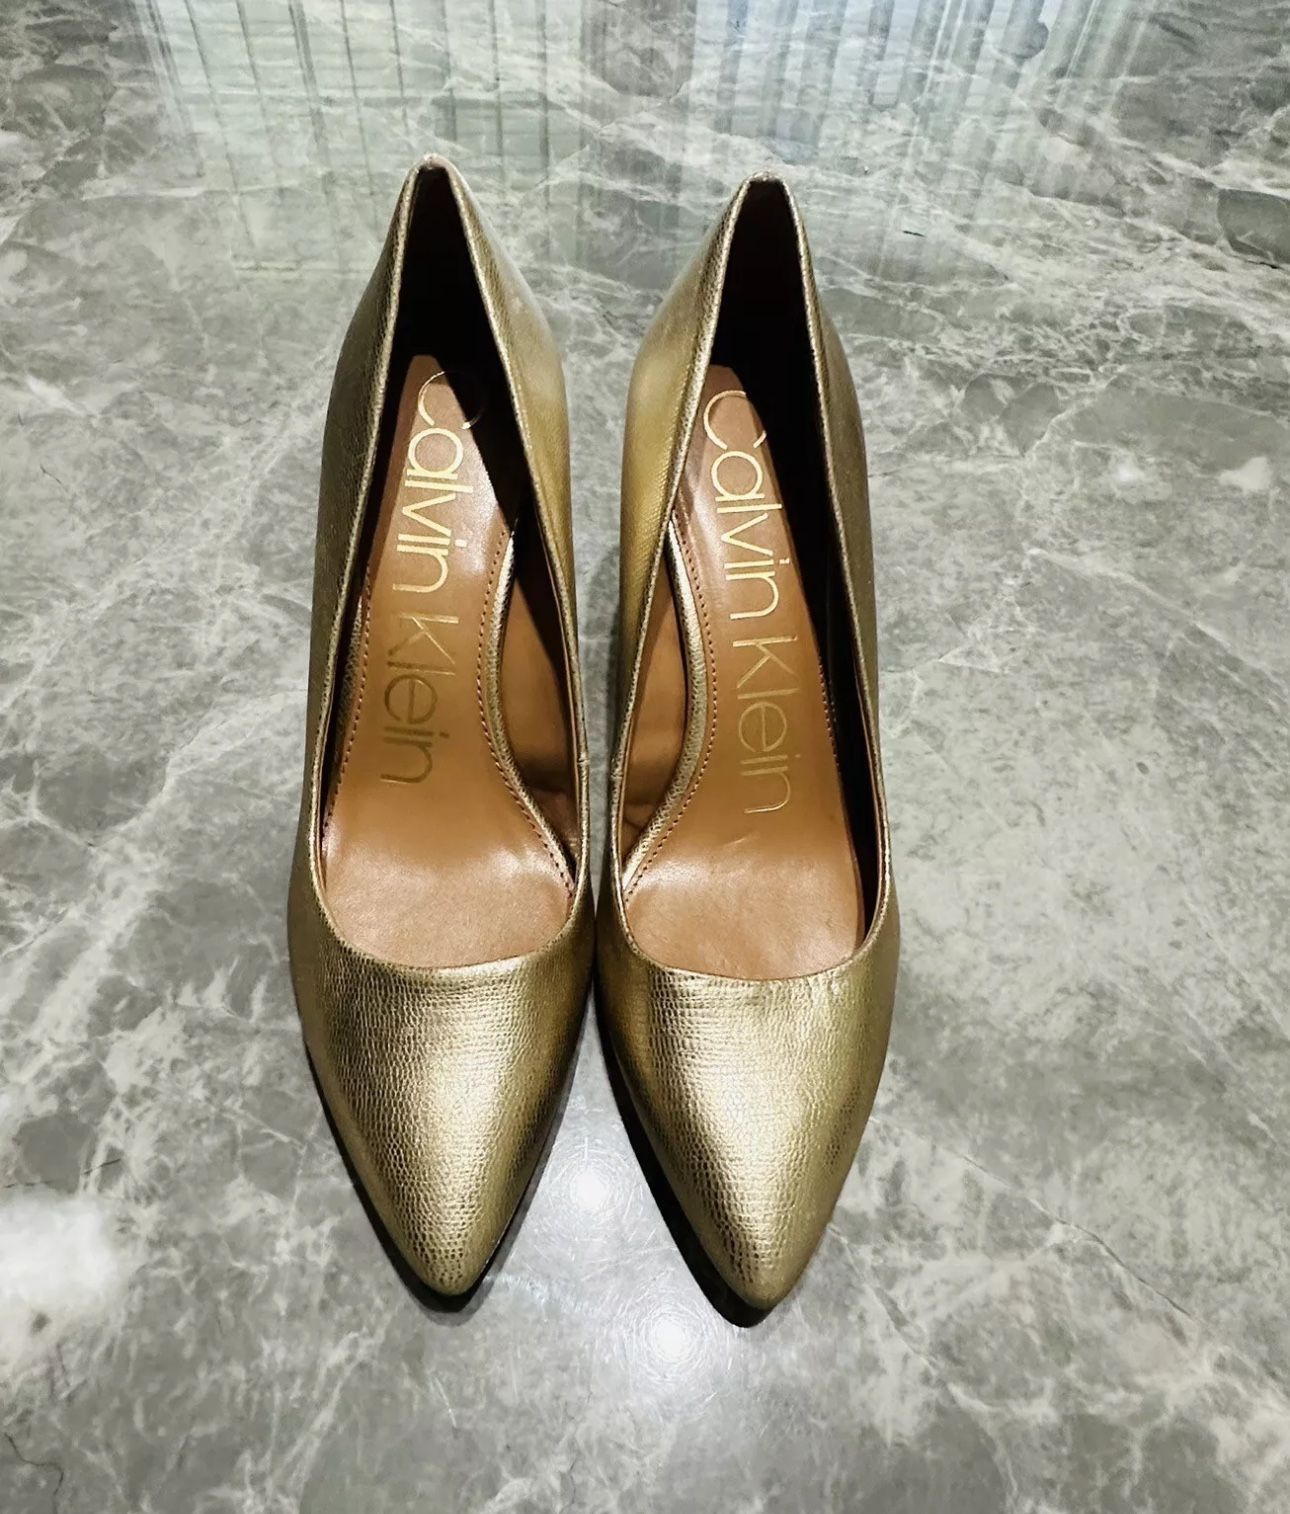 Calvin Klein Glamour Gold Pointed Toe Kitten Heels Versatile Women’s SZ 8.5. Condition is Pre-owned. Shipped with USPS Priority Mail.   Minor flesh co